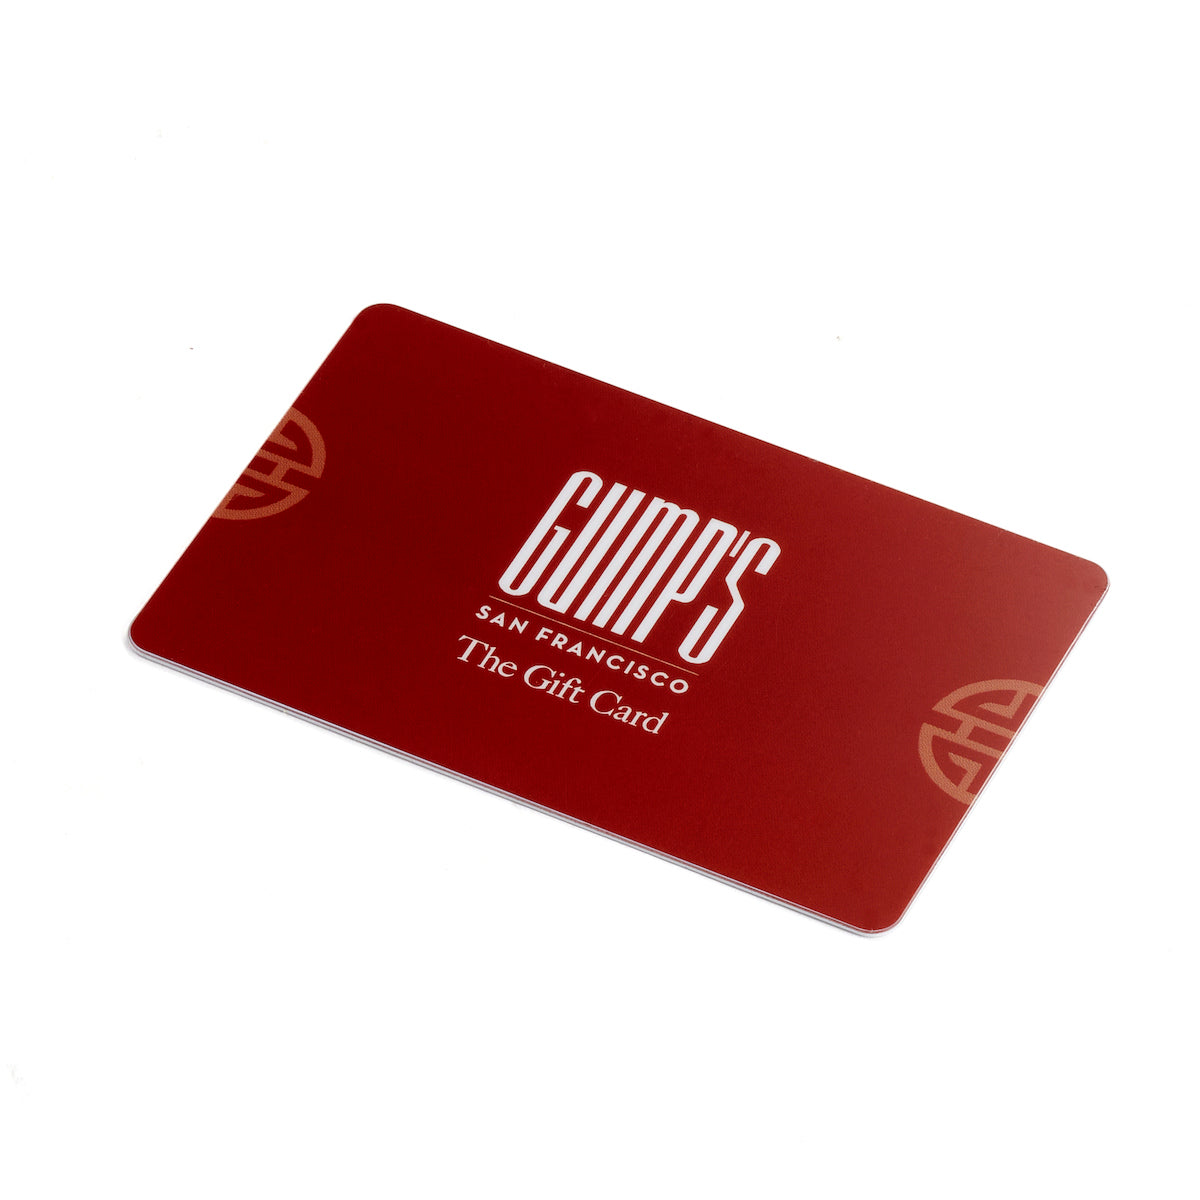 The Gump's Gift Card $200